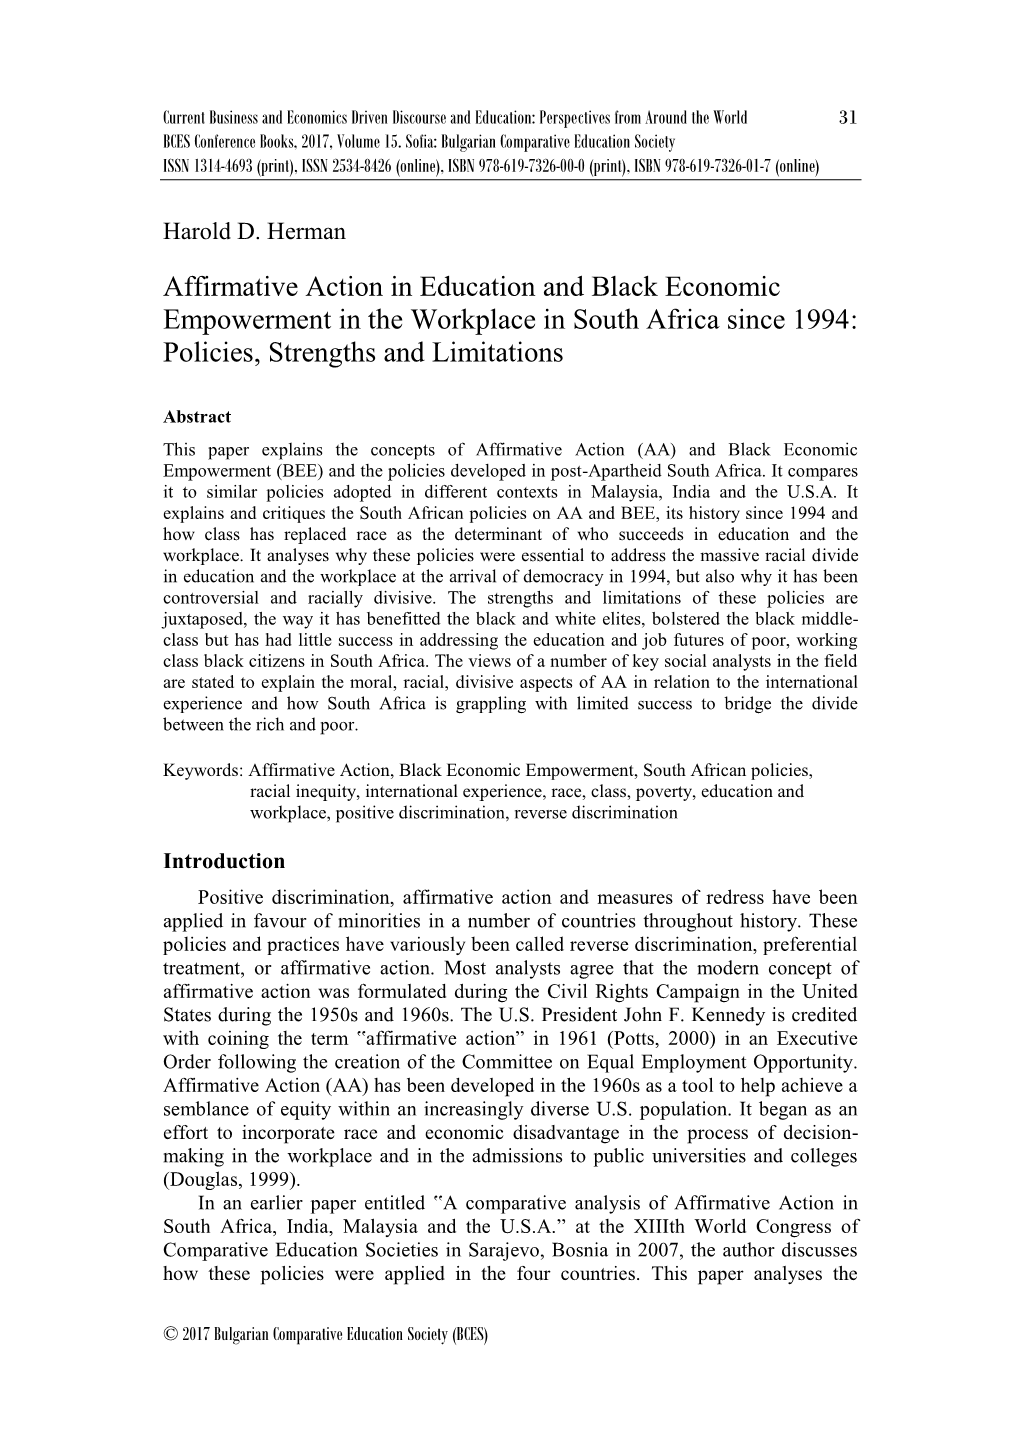 Affirmative Action in Education and Black Economic Empowerment in the Workplace in South Africa Since 1994: Policies, Strengths and Limitations